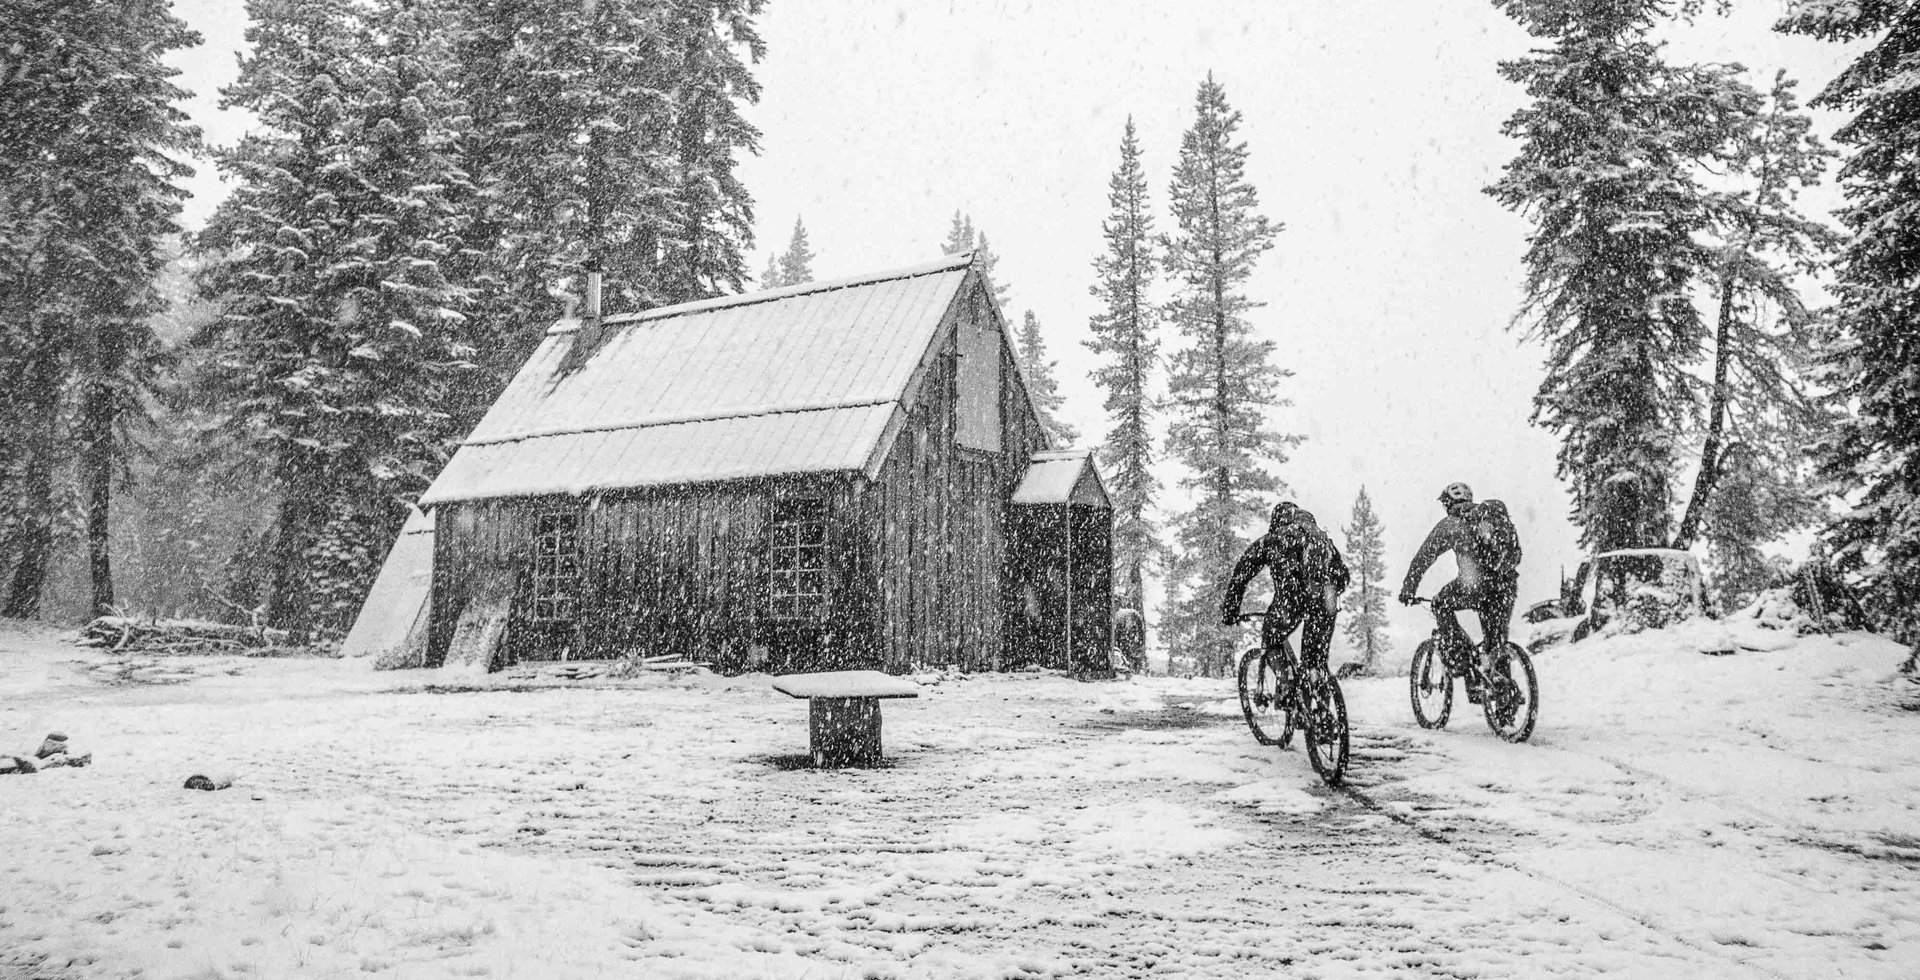 Nothing beats a warm fire and hot meal after a long, cold ride. Eric Porter and Kurt Gensheimer pedal out of a September snowstorm, eager to arrive at the evening’s accommodations.